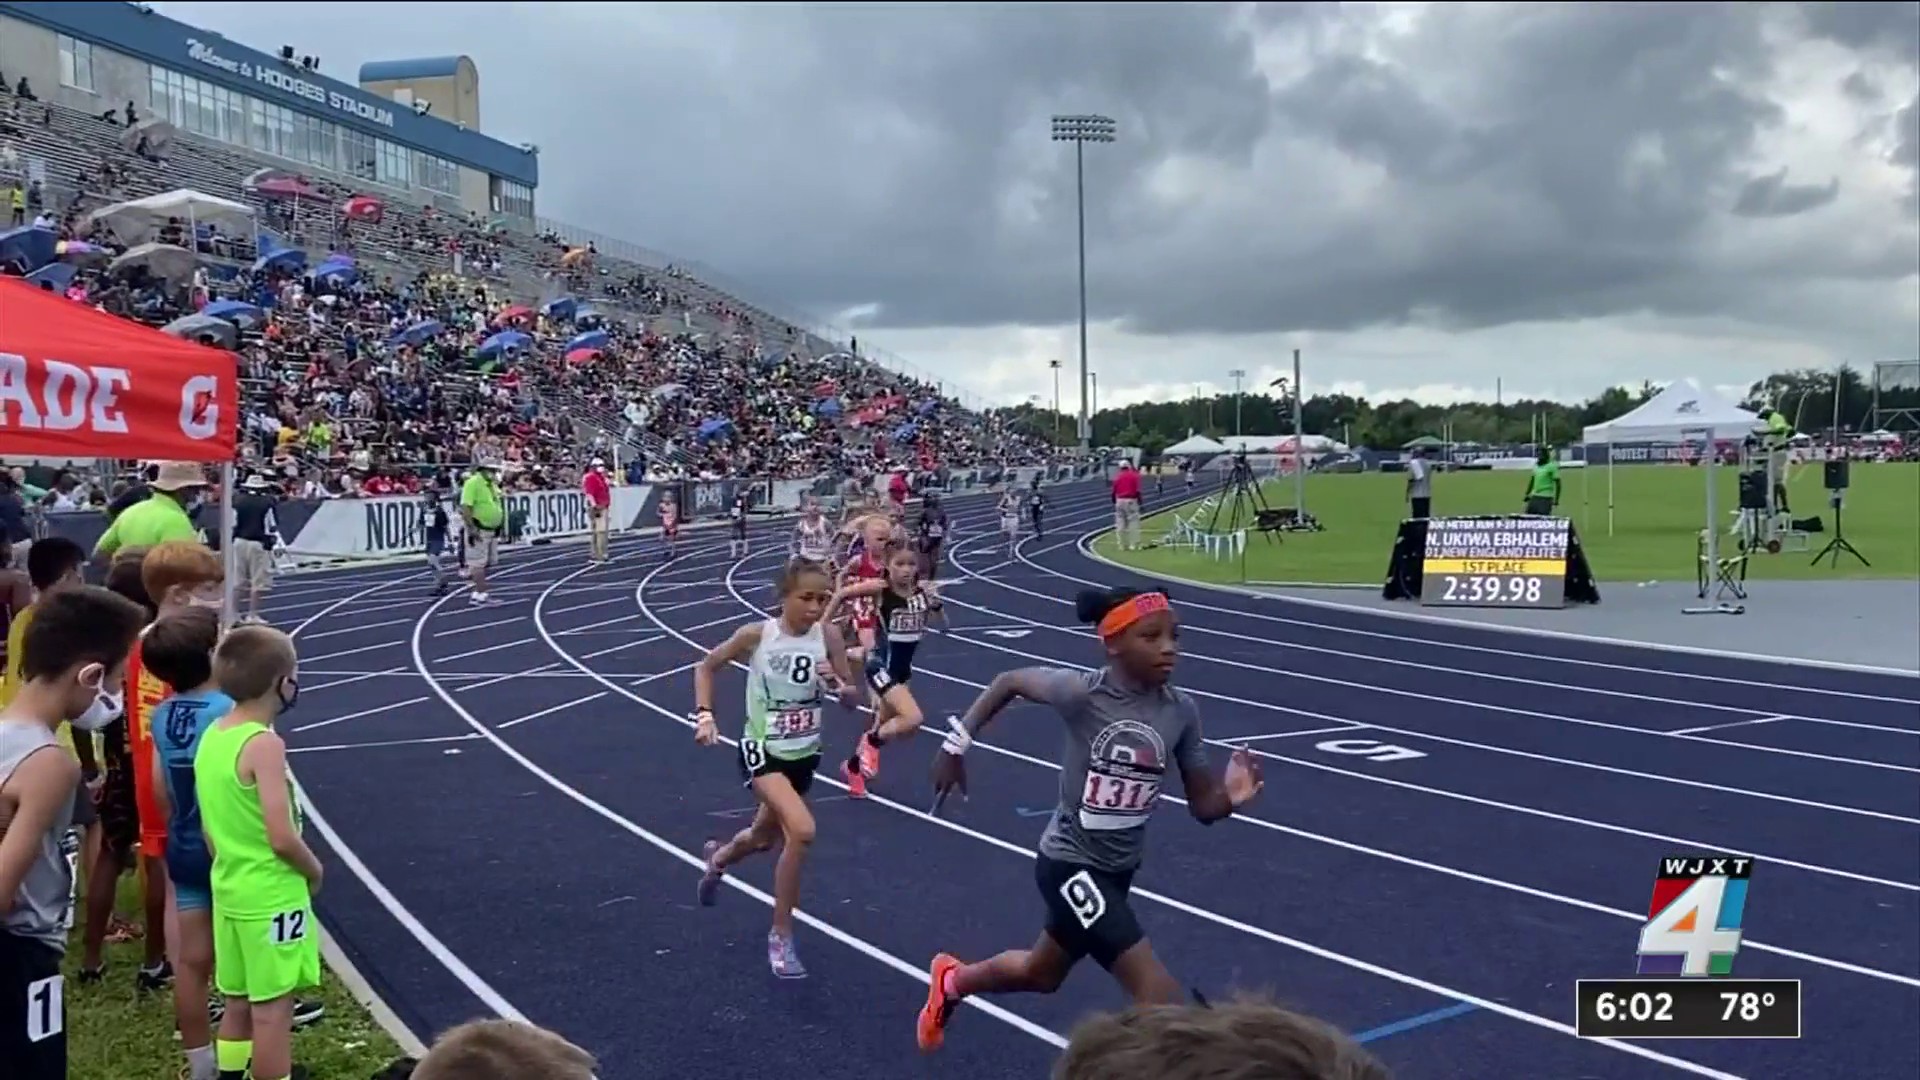 USATF athletes participating in Junior Olympics receiving daily